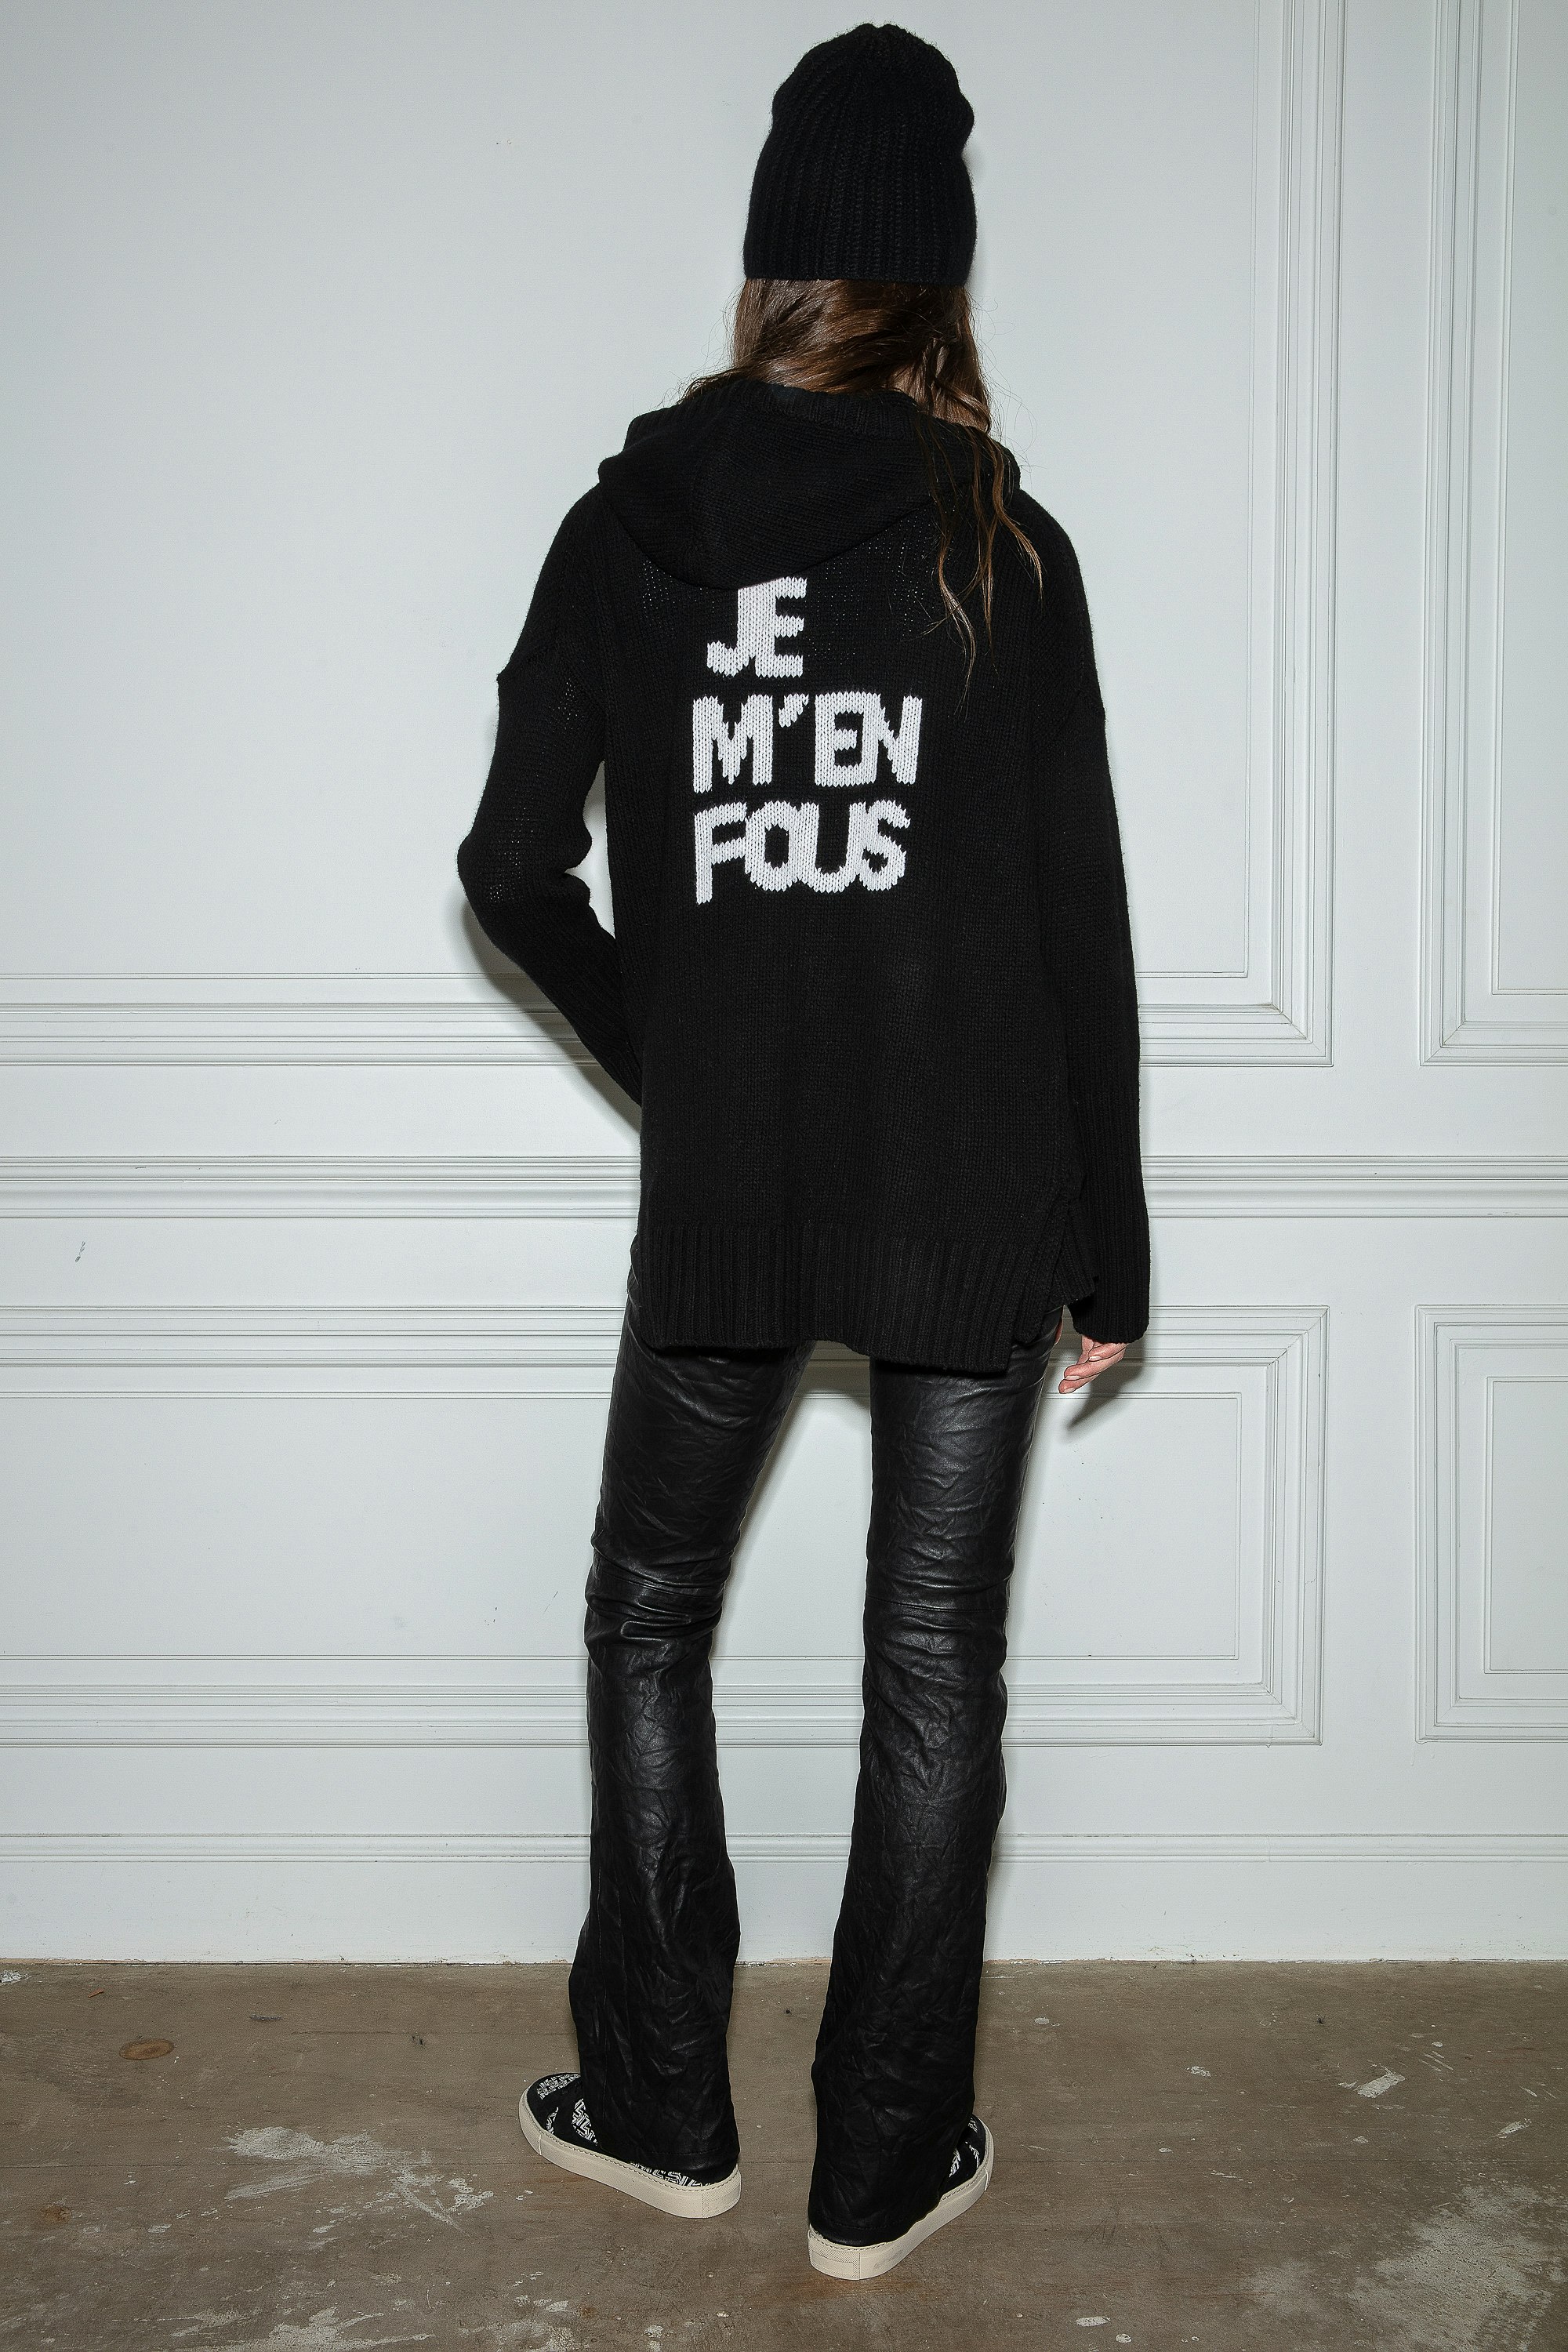 Salma Cardigan Women’s black knit cardigan with zip fastening and hood with the slogan “Je m’en fous” on the back